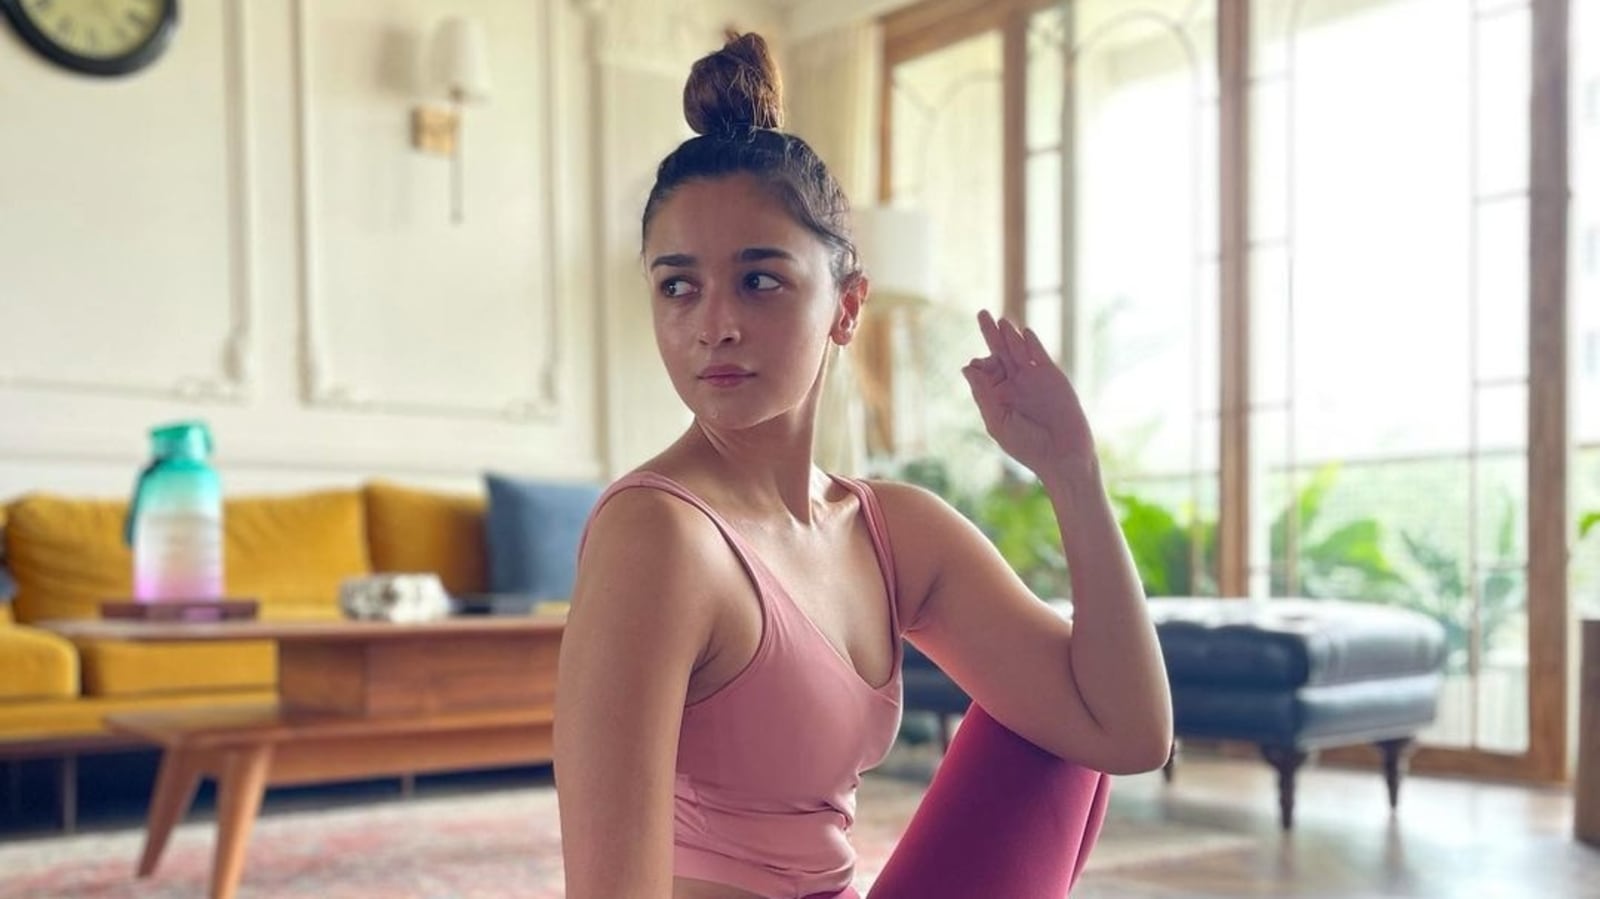 Alia Bhatt gives sneak peek of her minimalistic home with stunning view  during yoga session | Bollywood - Hindustan Times